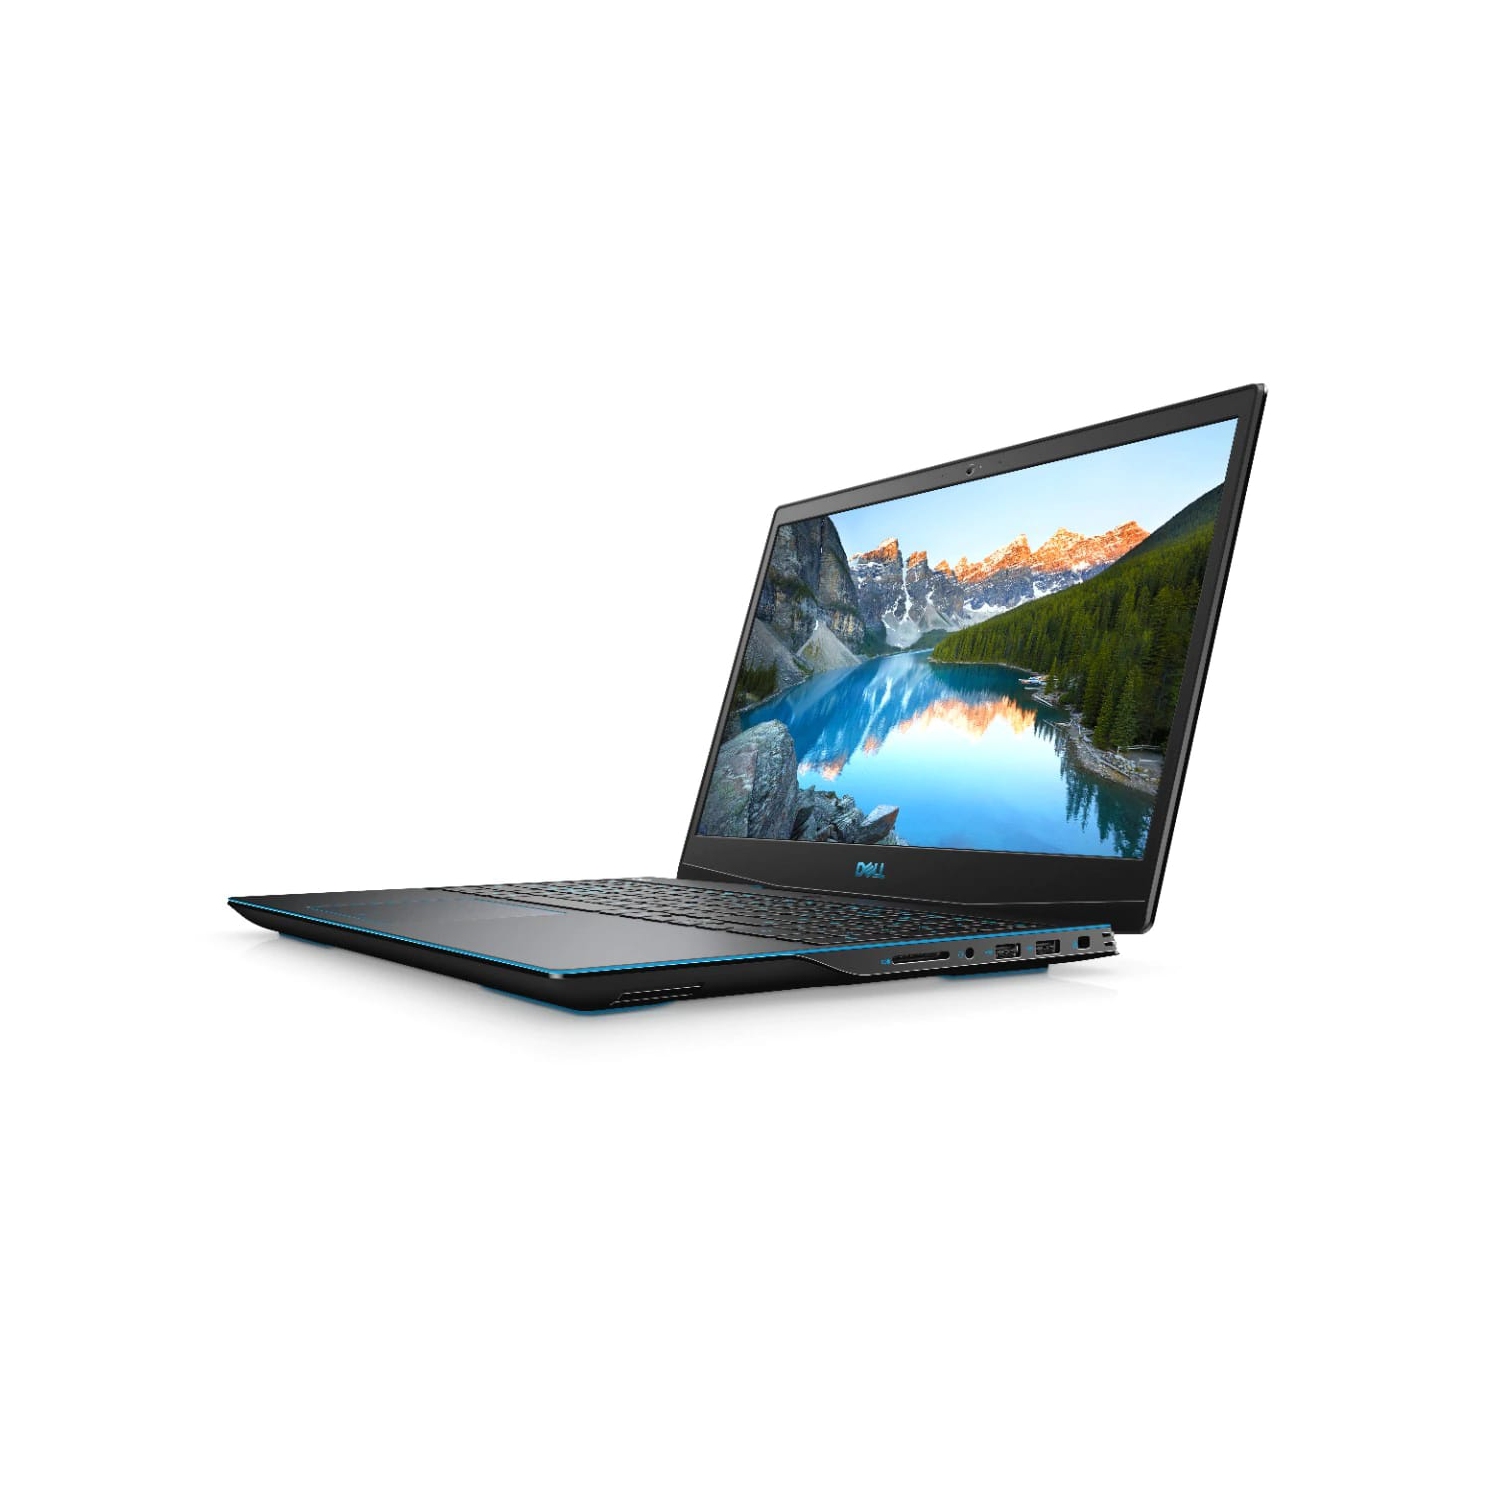 Refurbished (Excellent) – Dell G3 3500 Gaming Laptop (2020) | 15.6" FHD | Core i7 - 512GB SSD - 16GB RAM - GTX 1650 | Cores - 10th Gen CPU